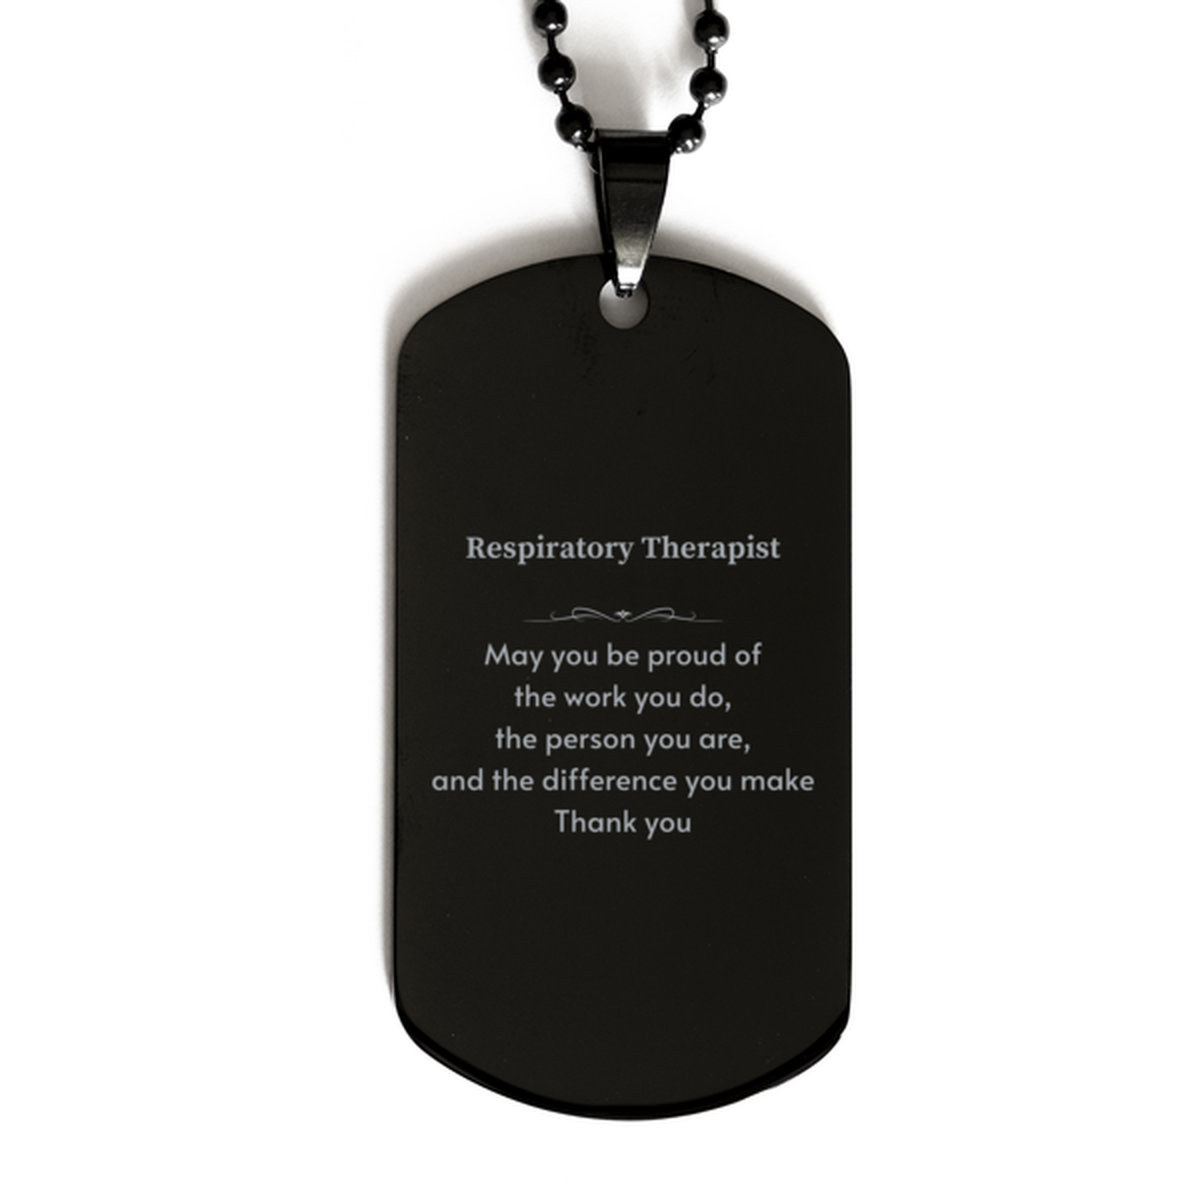 Heartwarming Black Dog Tag Retirement Coworkers Gifts for Respiratory Therapist, Respiratory Therapist May You be proud of the work you do, the person you are Gifts for Boss Men Women Friends